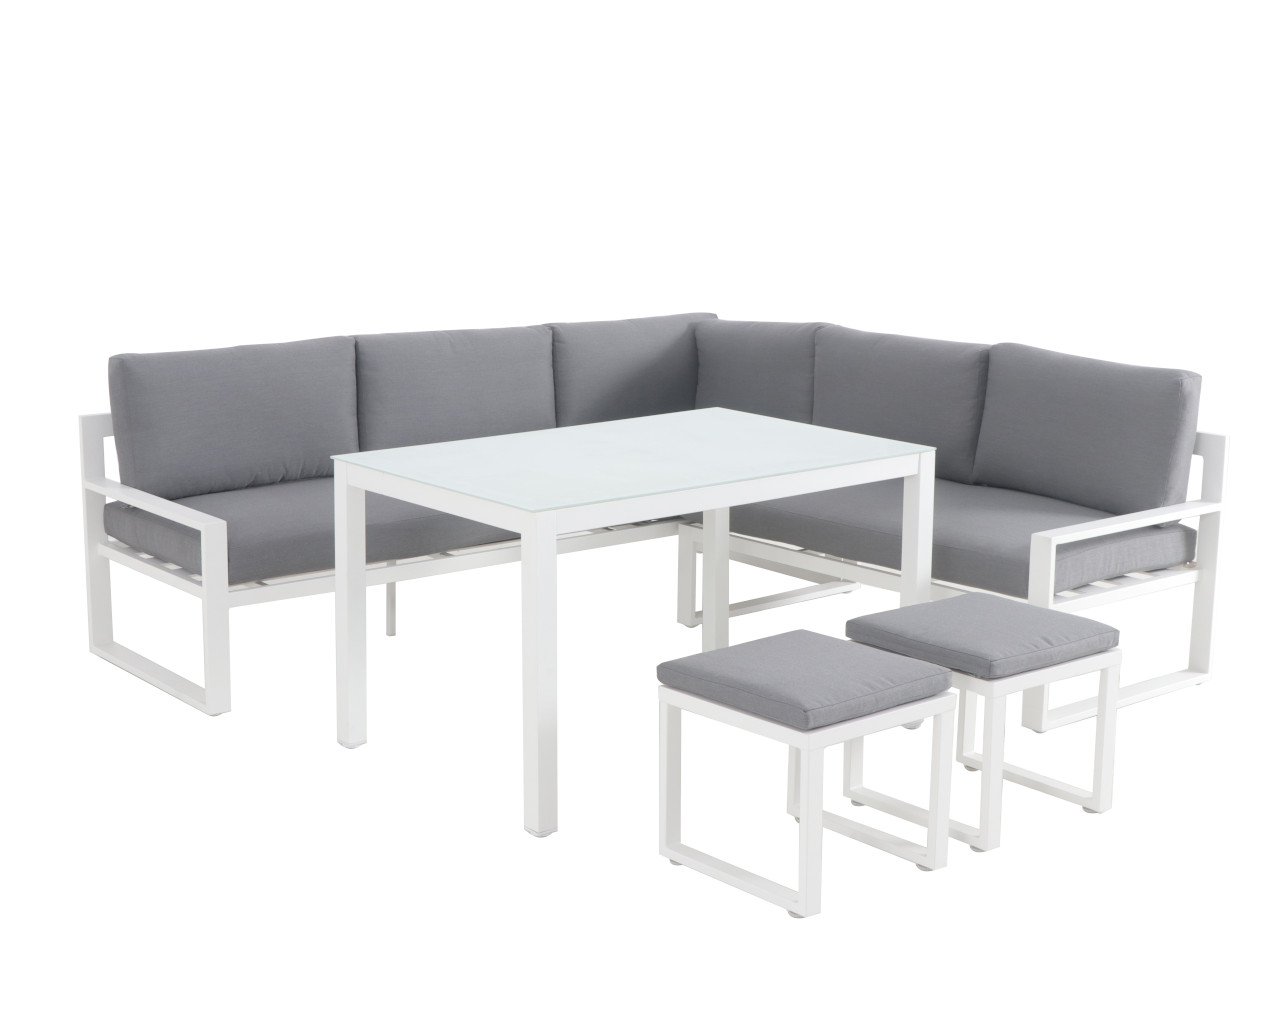 Patmos 5 Piece Low Dining Setting, White, small-swatch